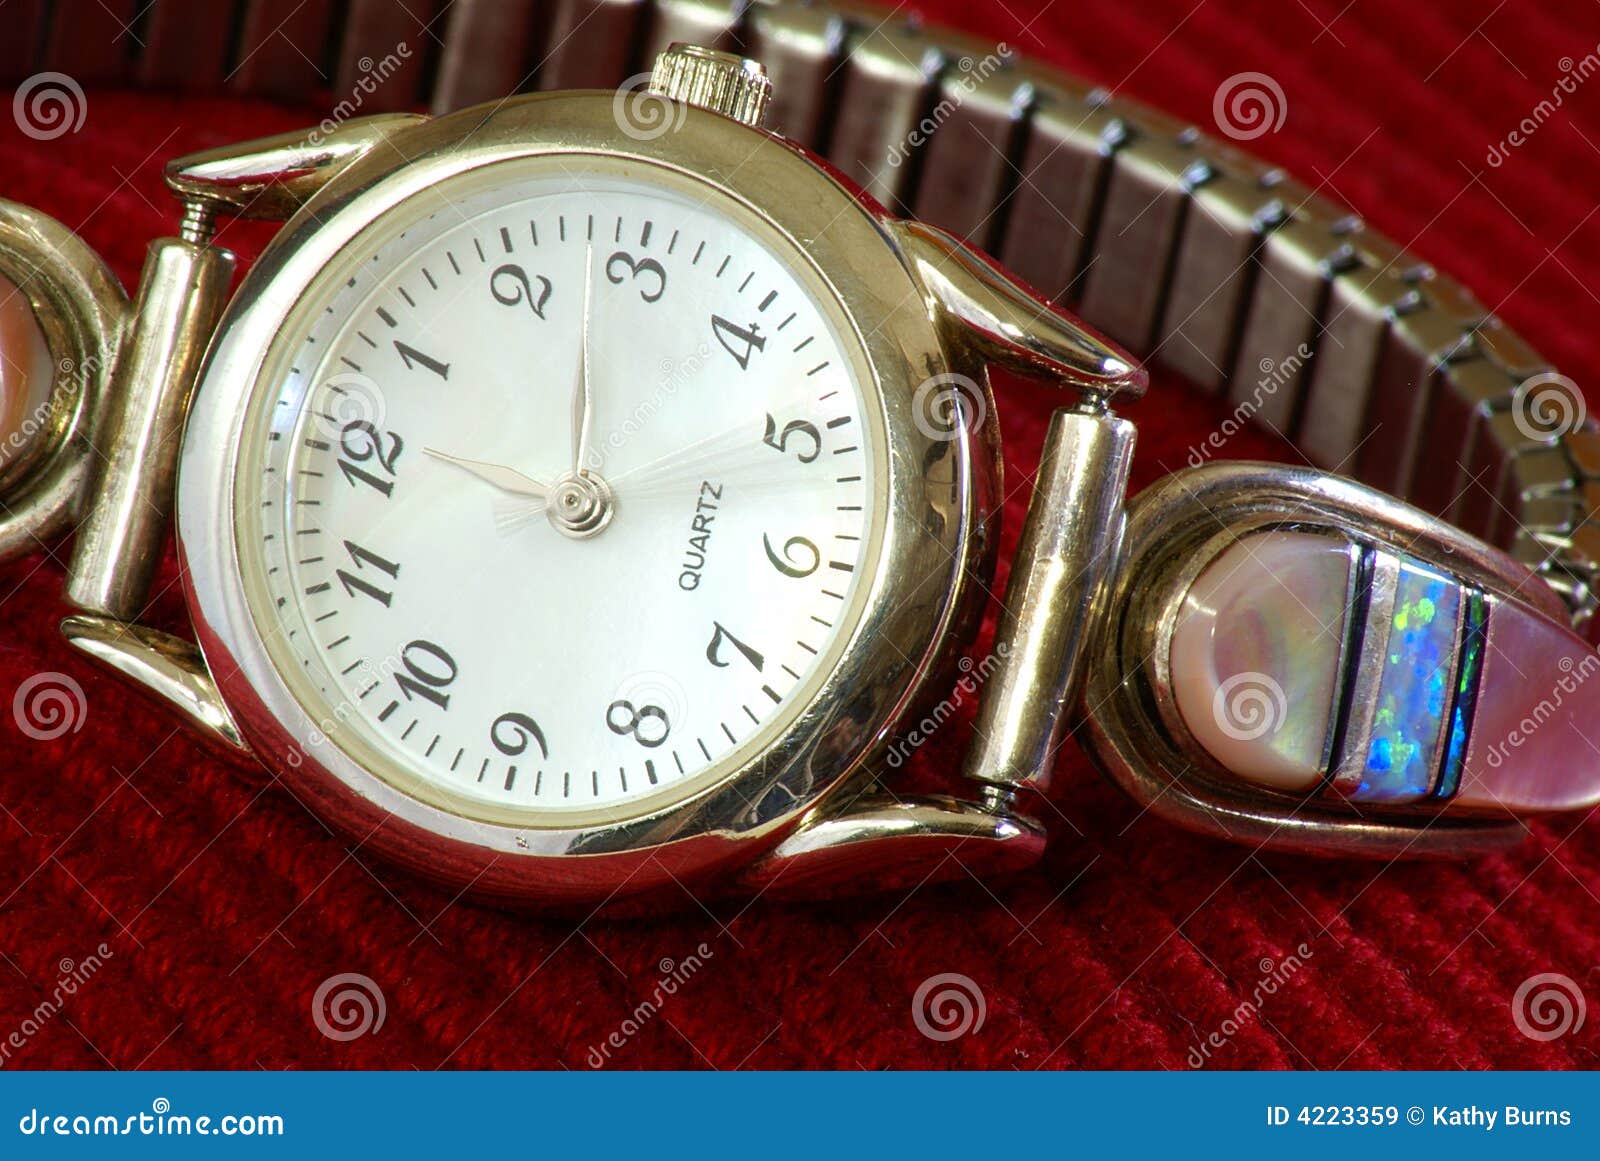 Lady s Wristwatch stock image. Image of round, numbers - 4223359